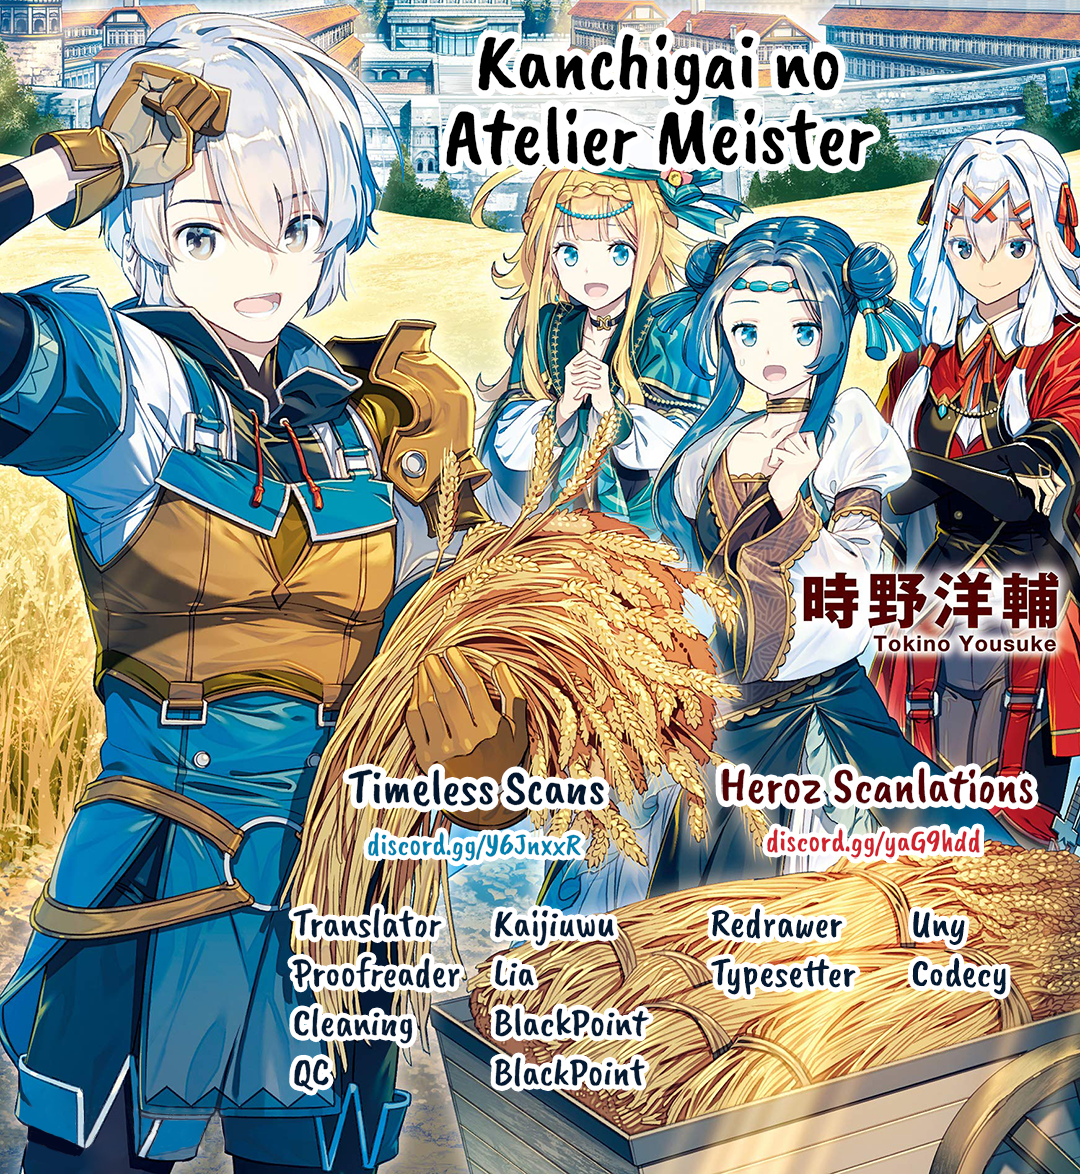 Kanchigai no Atelier Master - Chapter 7466 - The Atelier Meister - Image 1